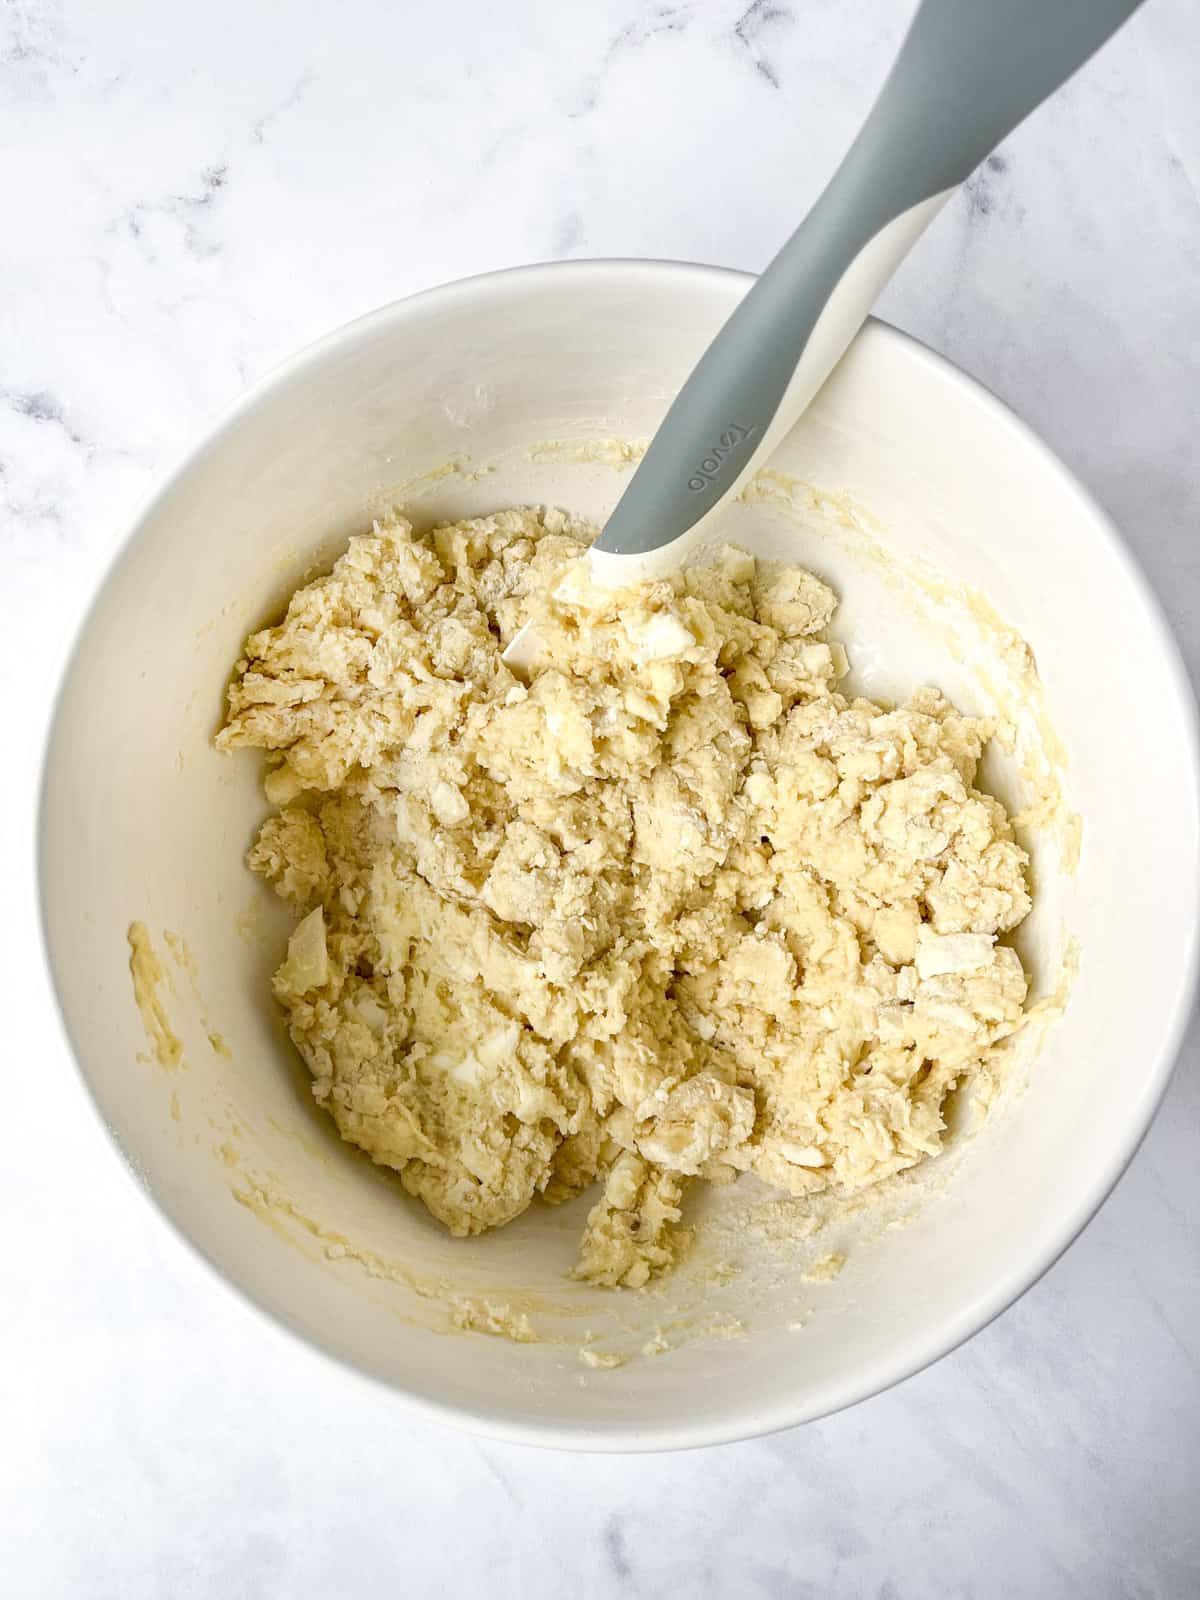 scone dough mixed together in a white bowl with a spatula